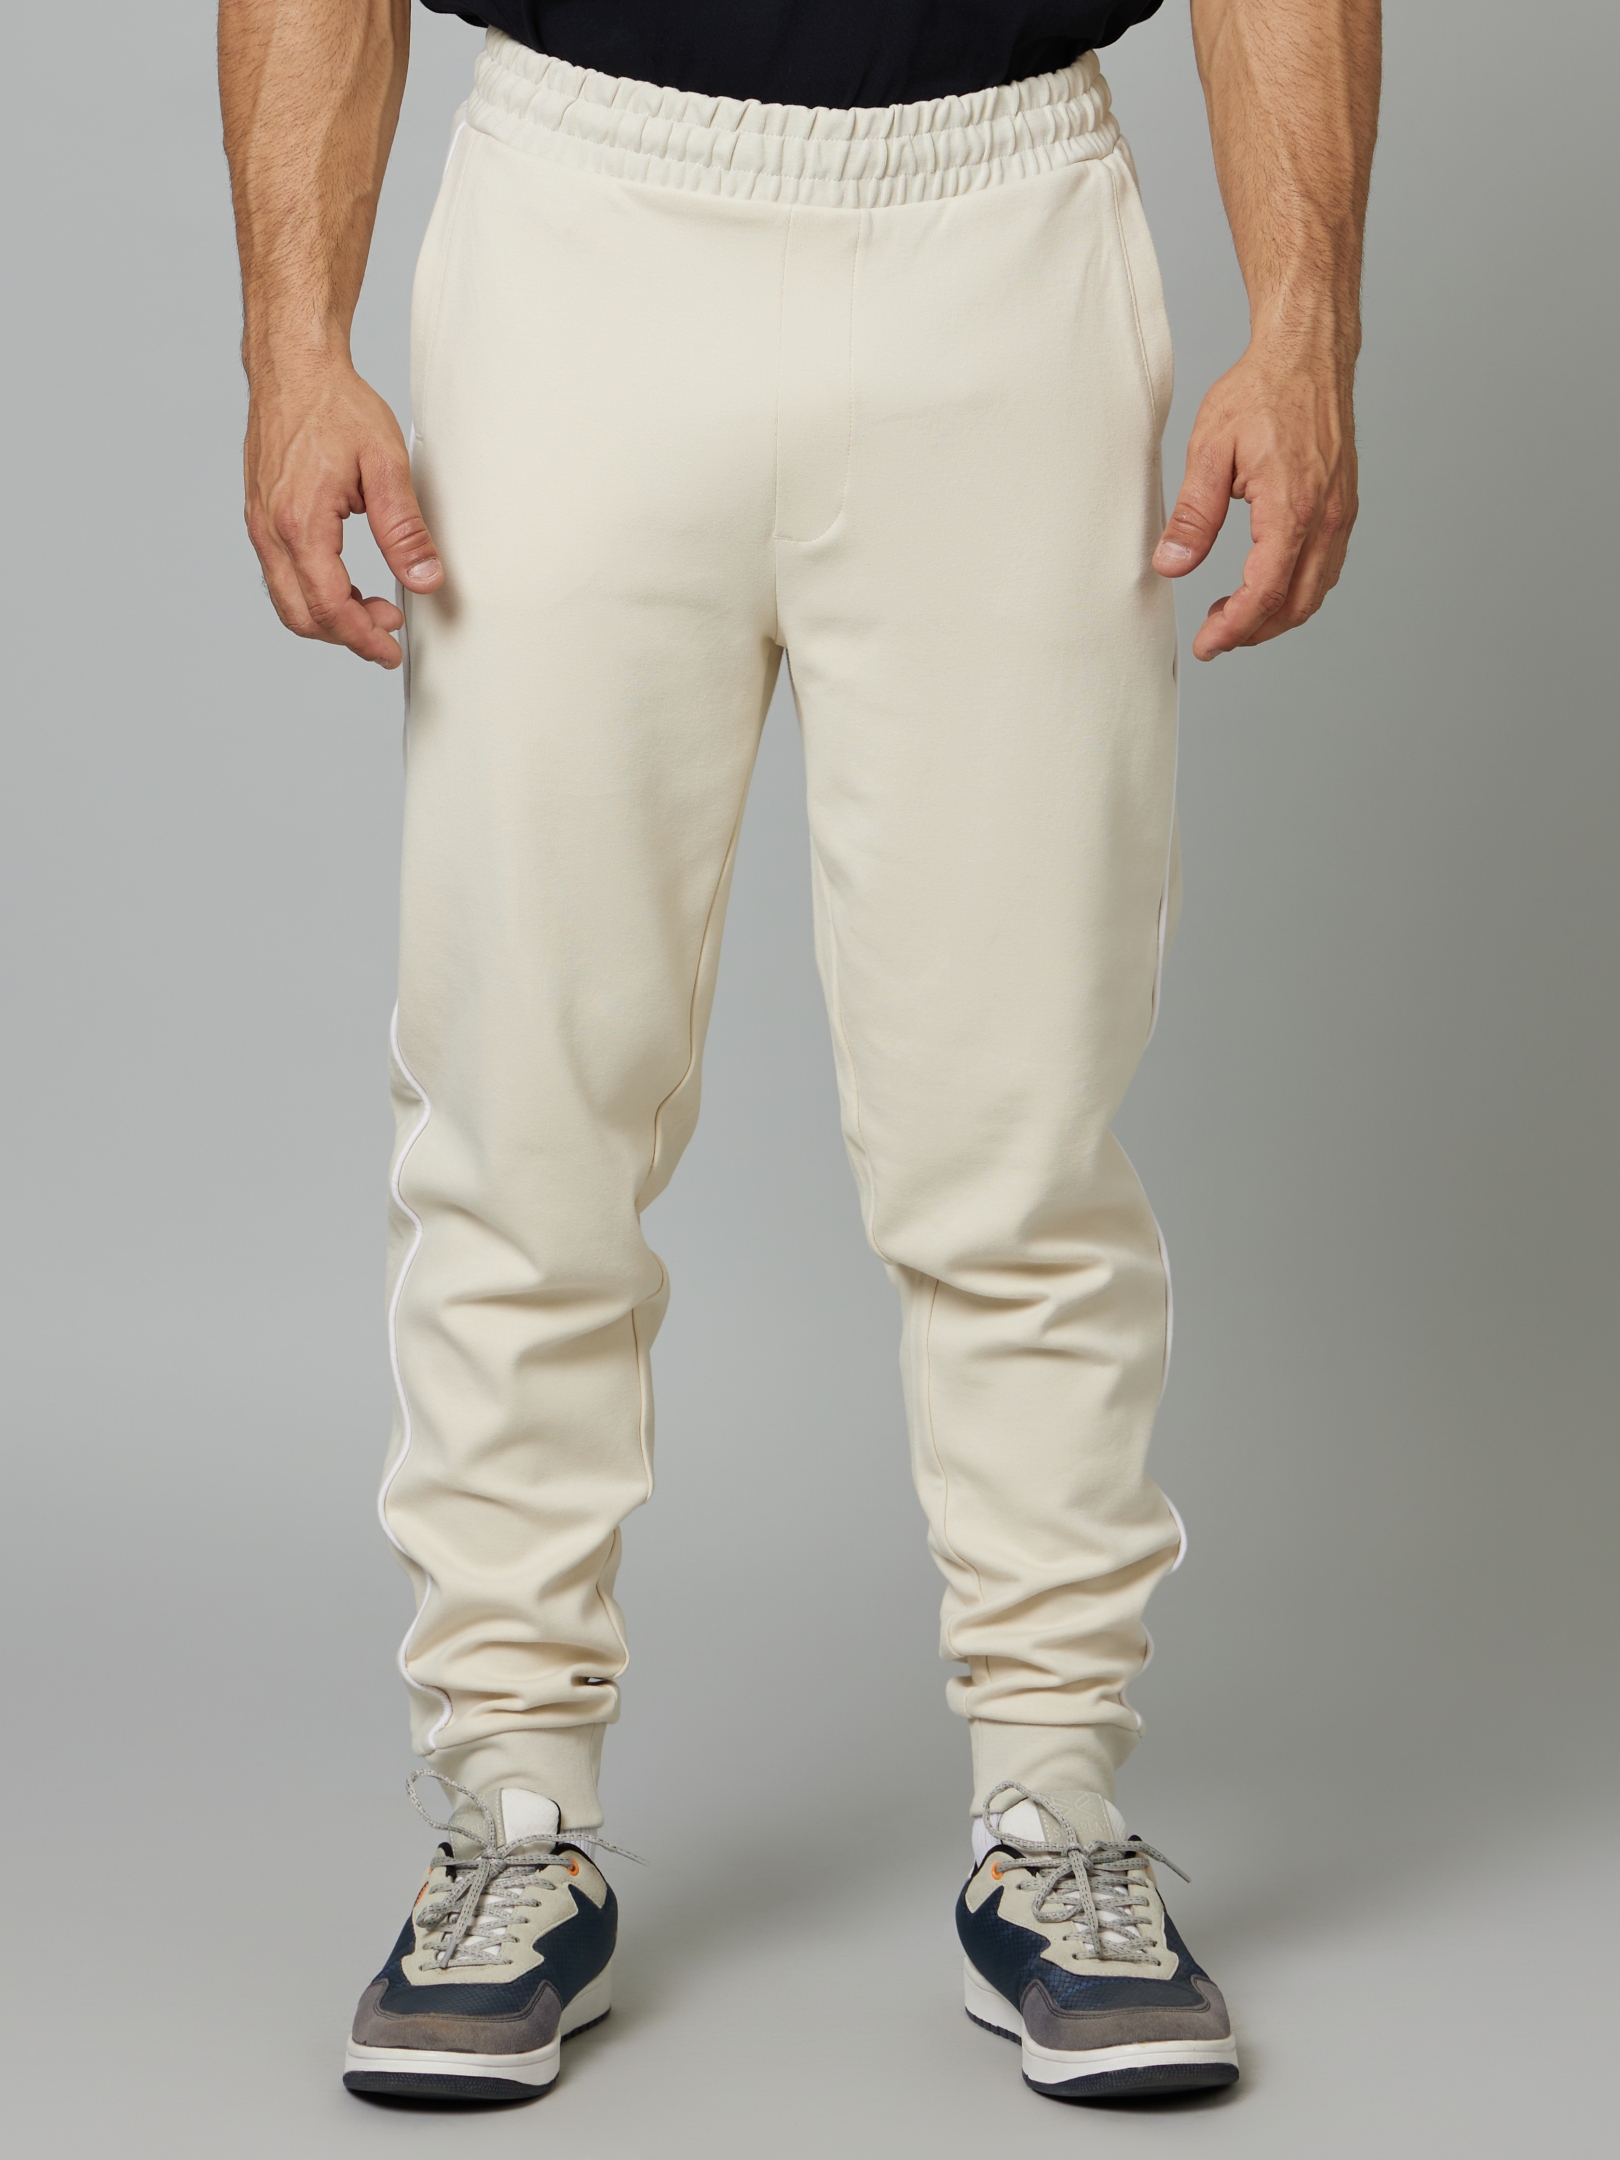 Men's White Cotton Blend Solid Casual Joggers